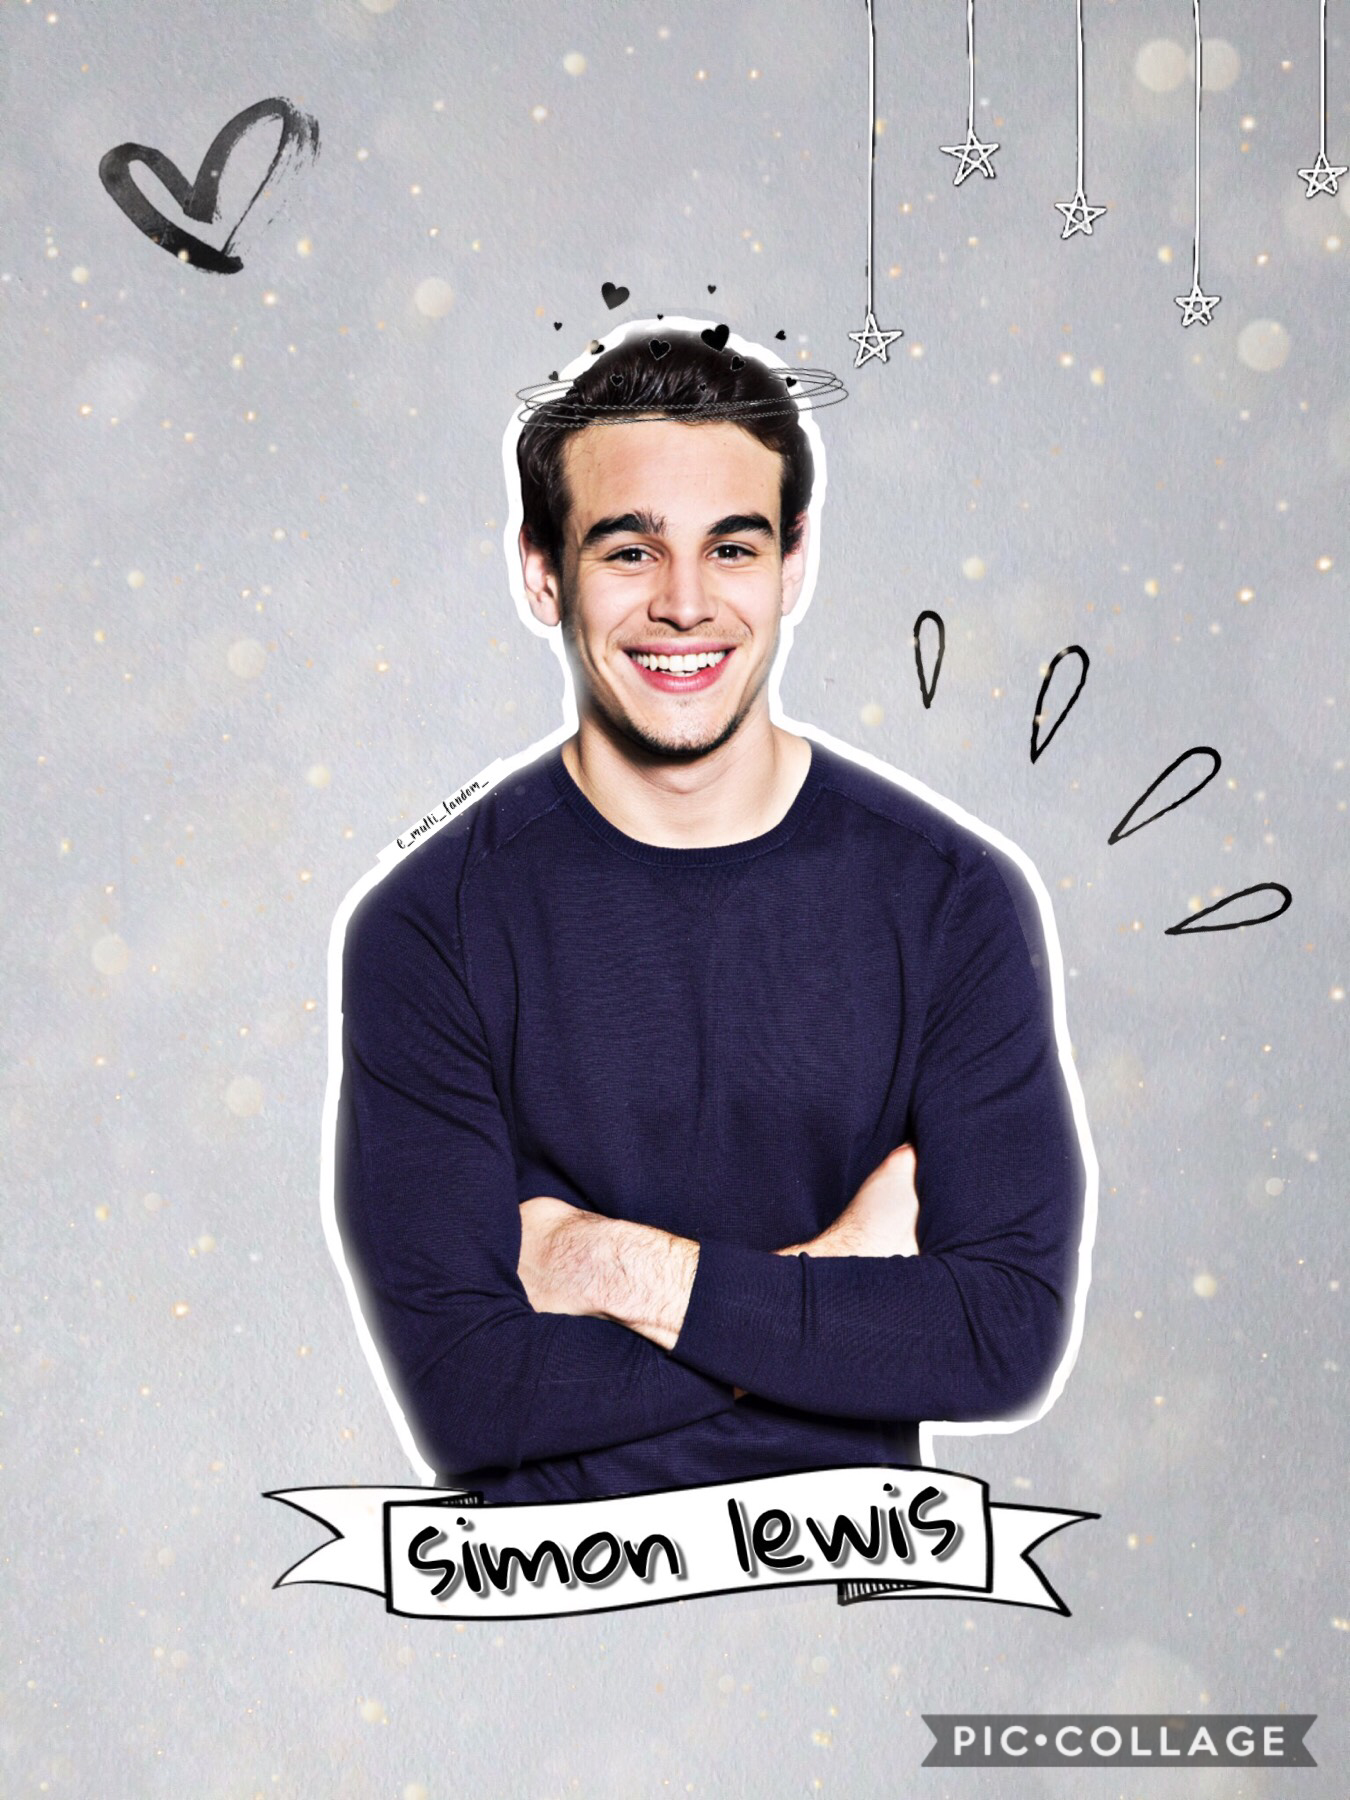 Simon Lewis from shadowhunters 💞